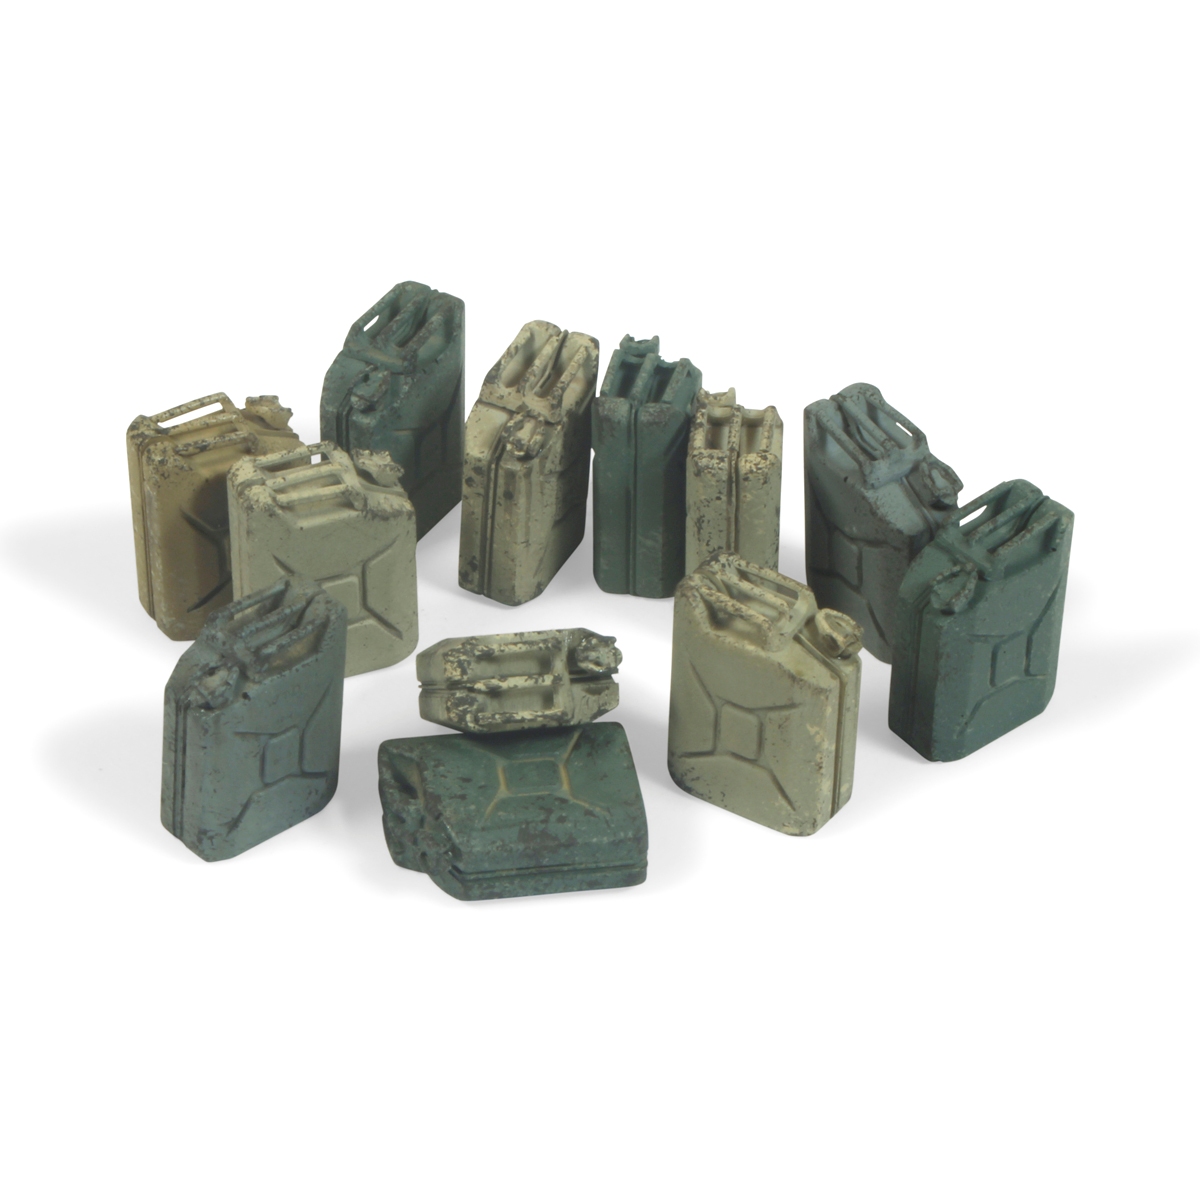 Allied Jerry Can set